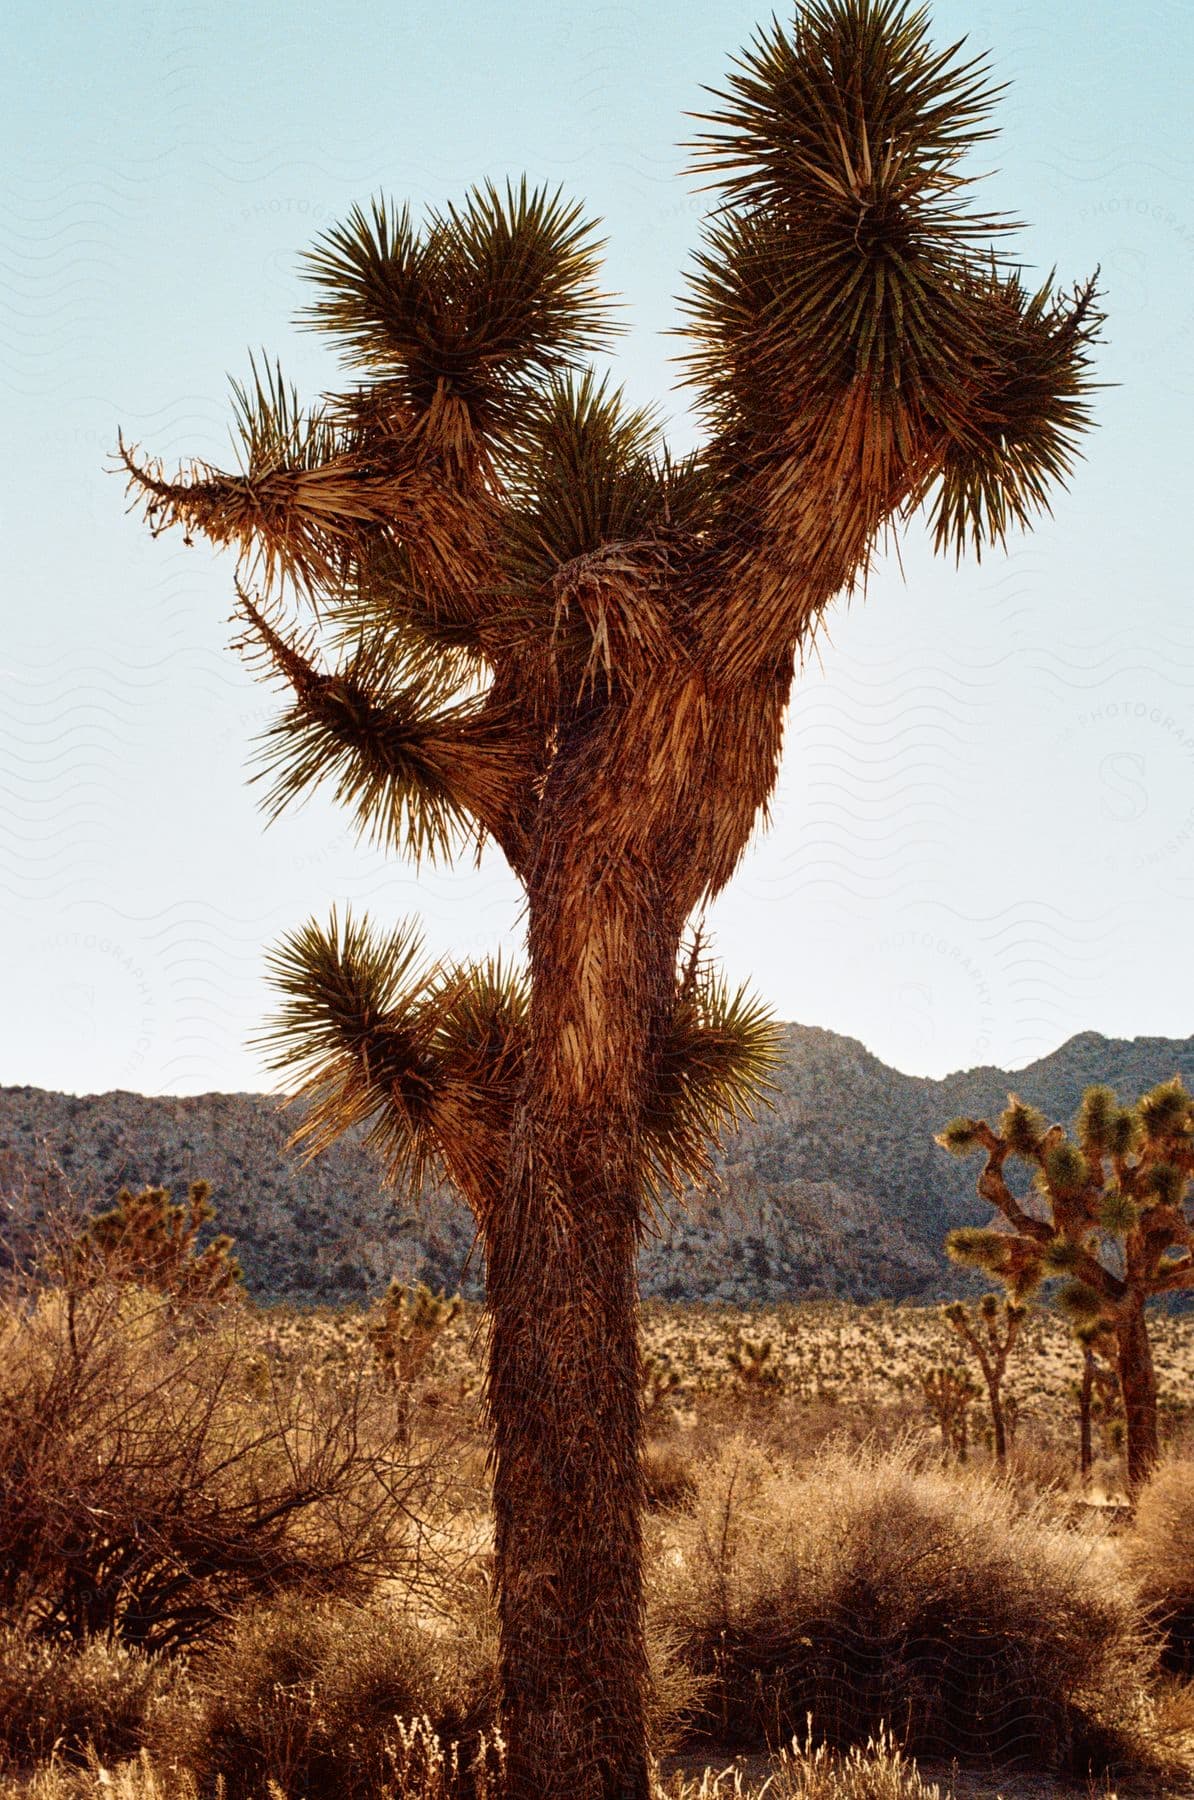 A giant cactus in a desert